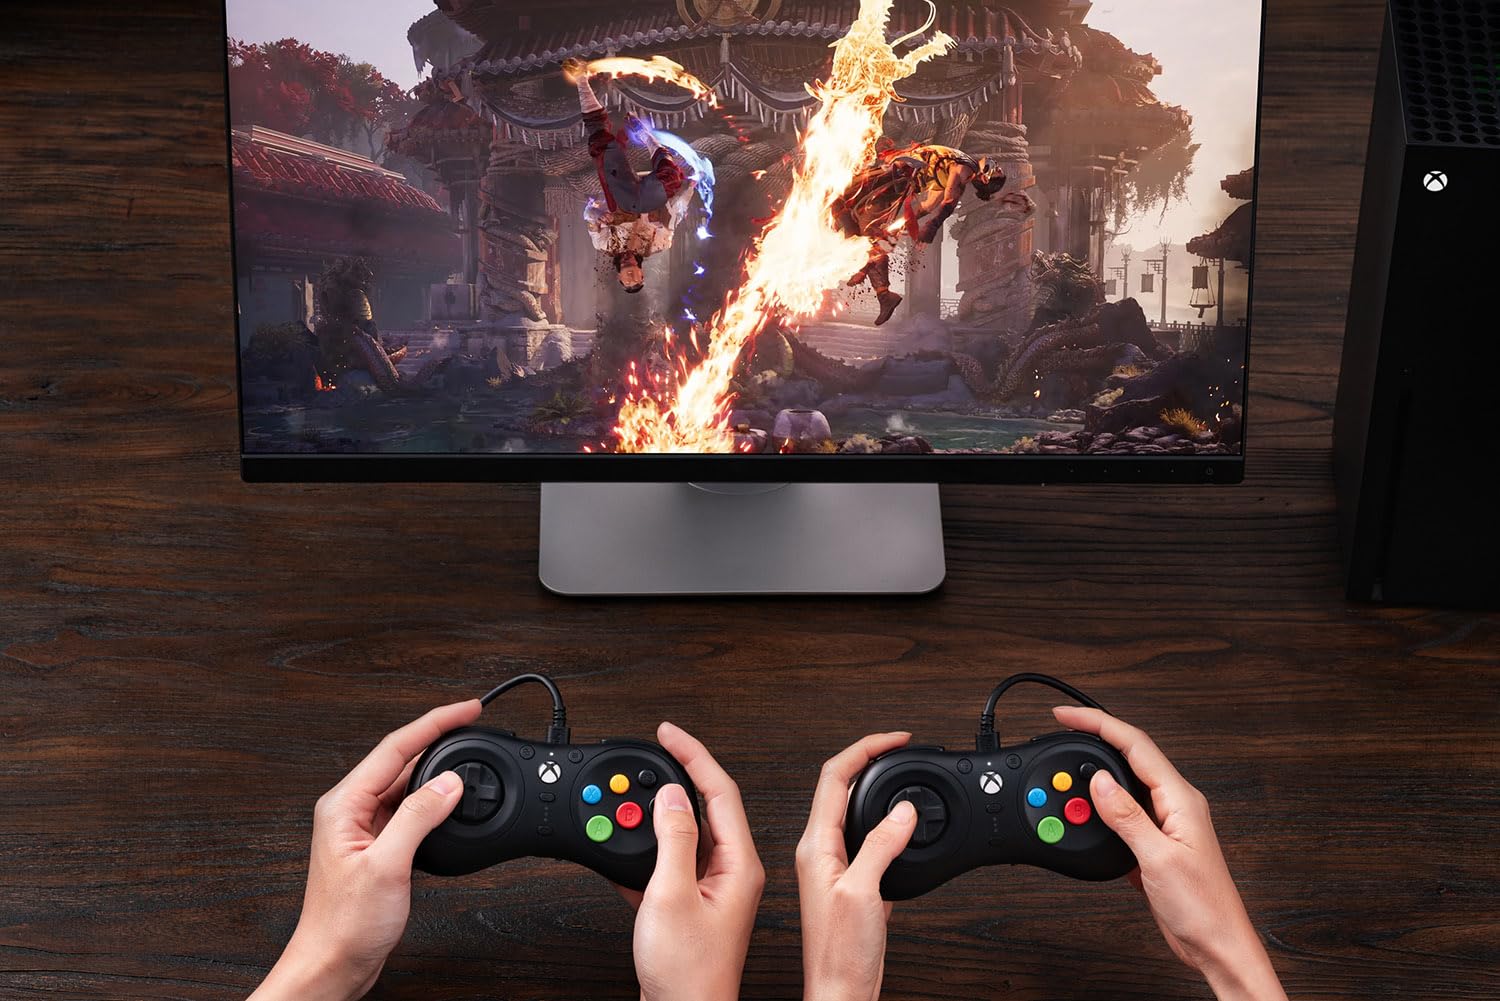 8Bitdo M30 Wired Controller for Xbox Series X|S, Xbox One, and Windows with 6-Button Layout - Officially Licensed